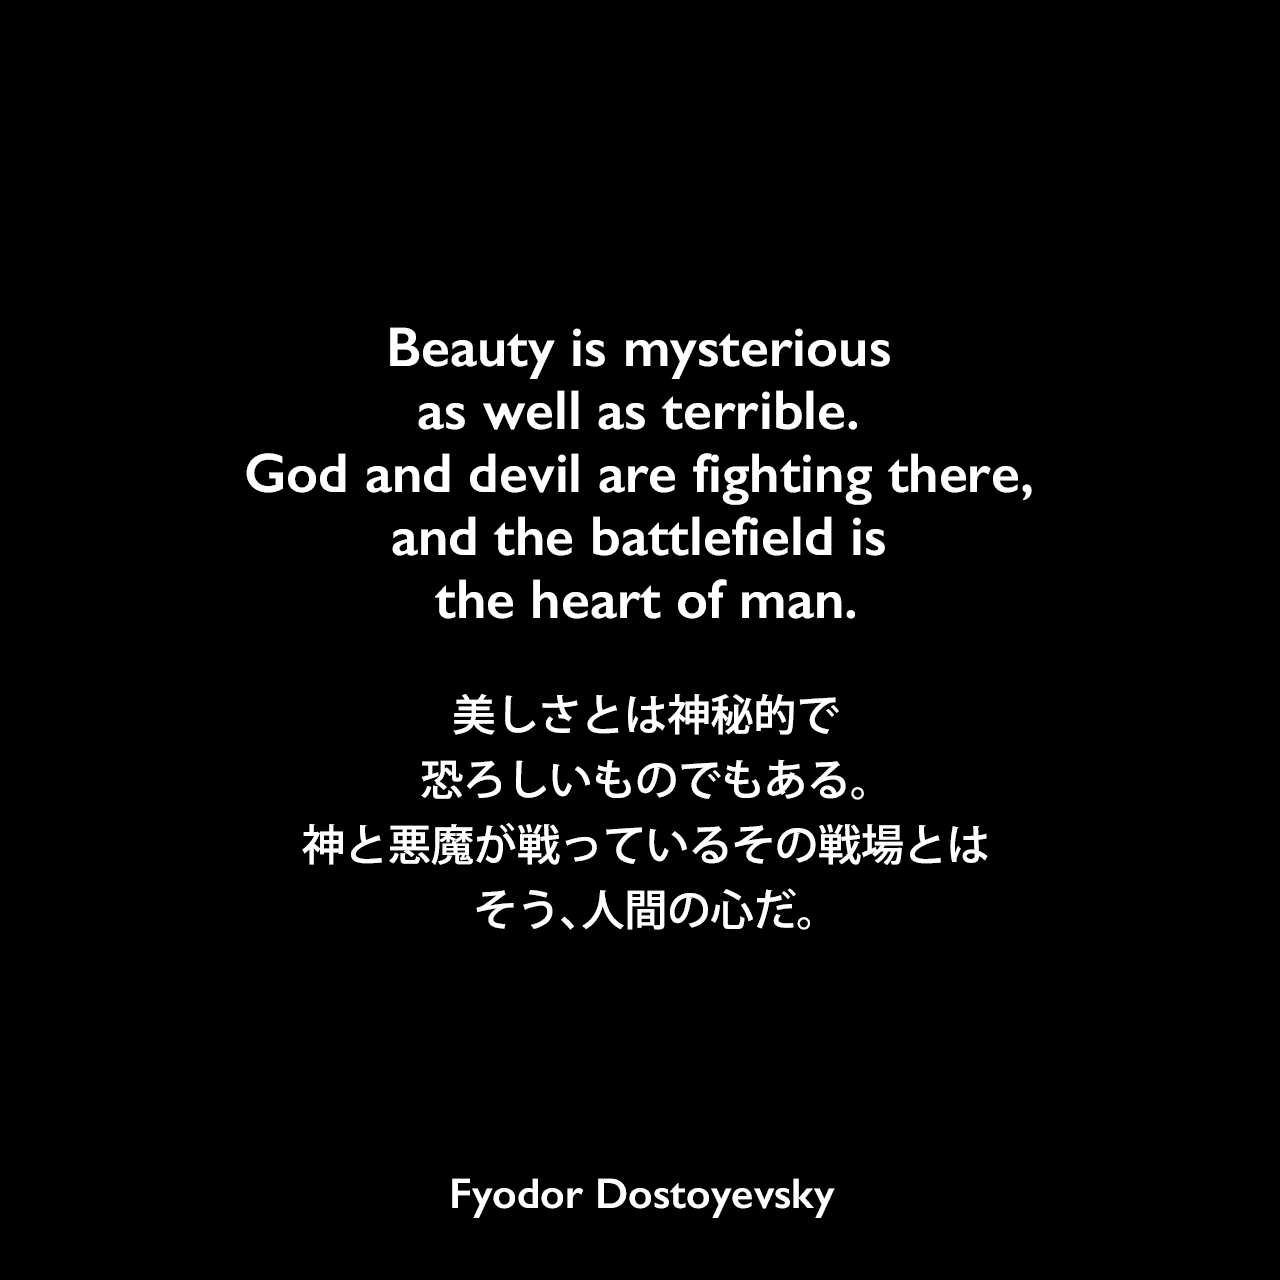 Beauty is mysterious as well as terrible. God and devil are fighting there, and the battlefield is the heart of man.美しさとは神秘的で恐ろしいものでもある。神と悪魔が戦っているその戦場とは、そう、人間の心だ。Fyodor Dostoyevsky